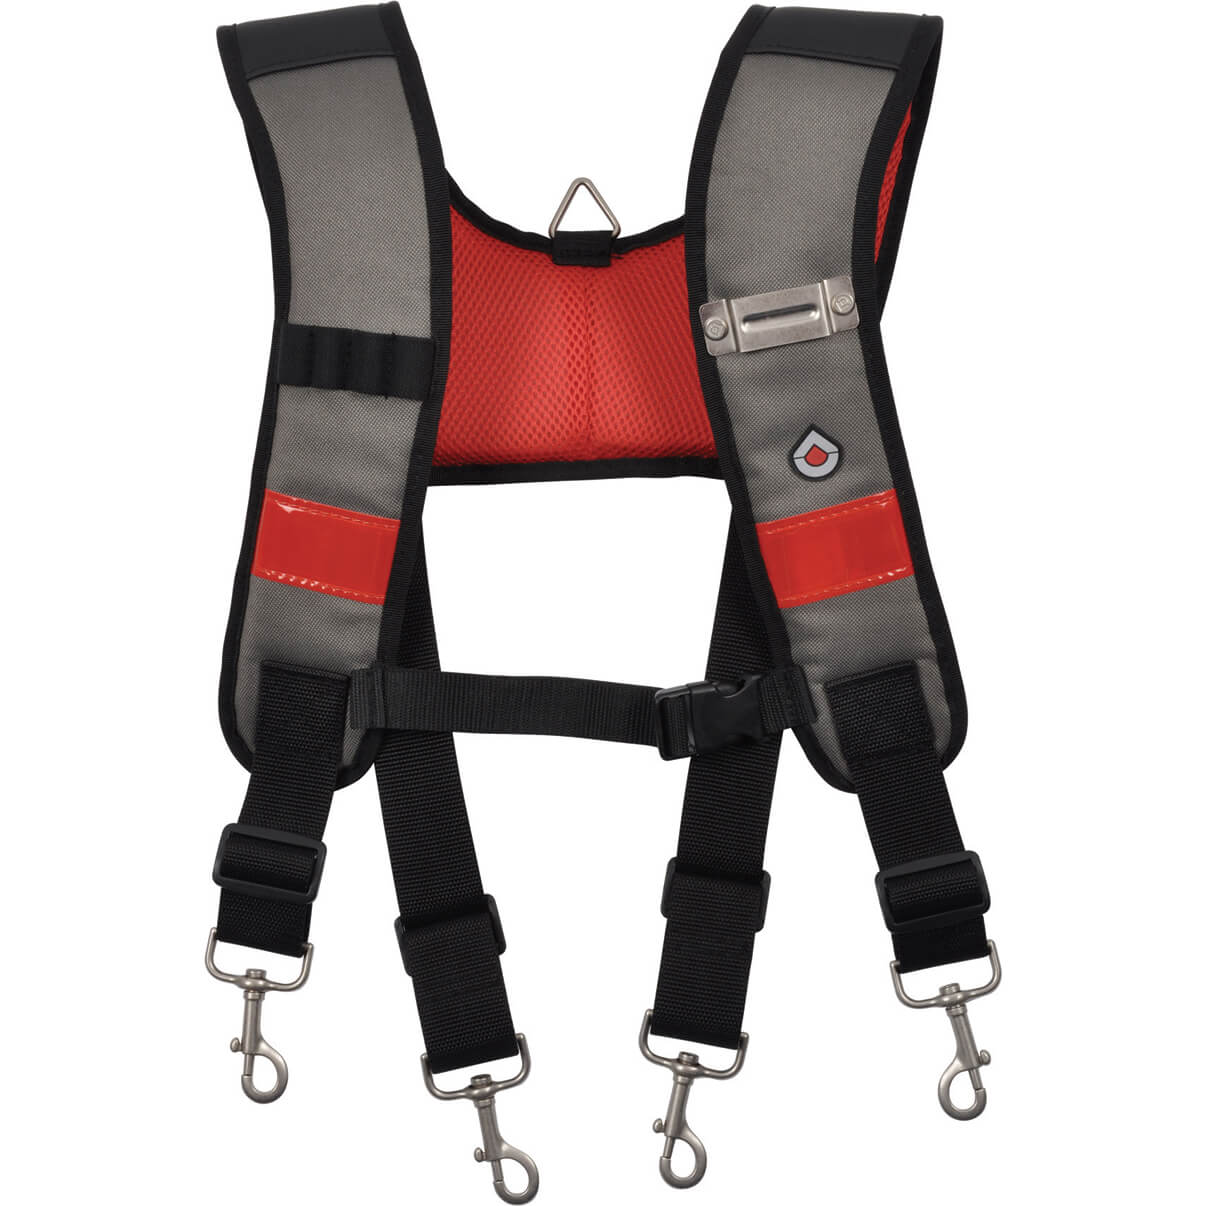 Image of CK Magma Comfort Tool Braces for MA2723 Work Belt